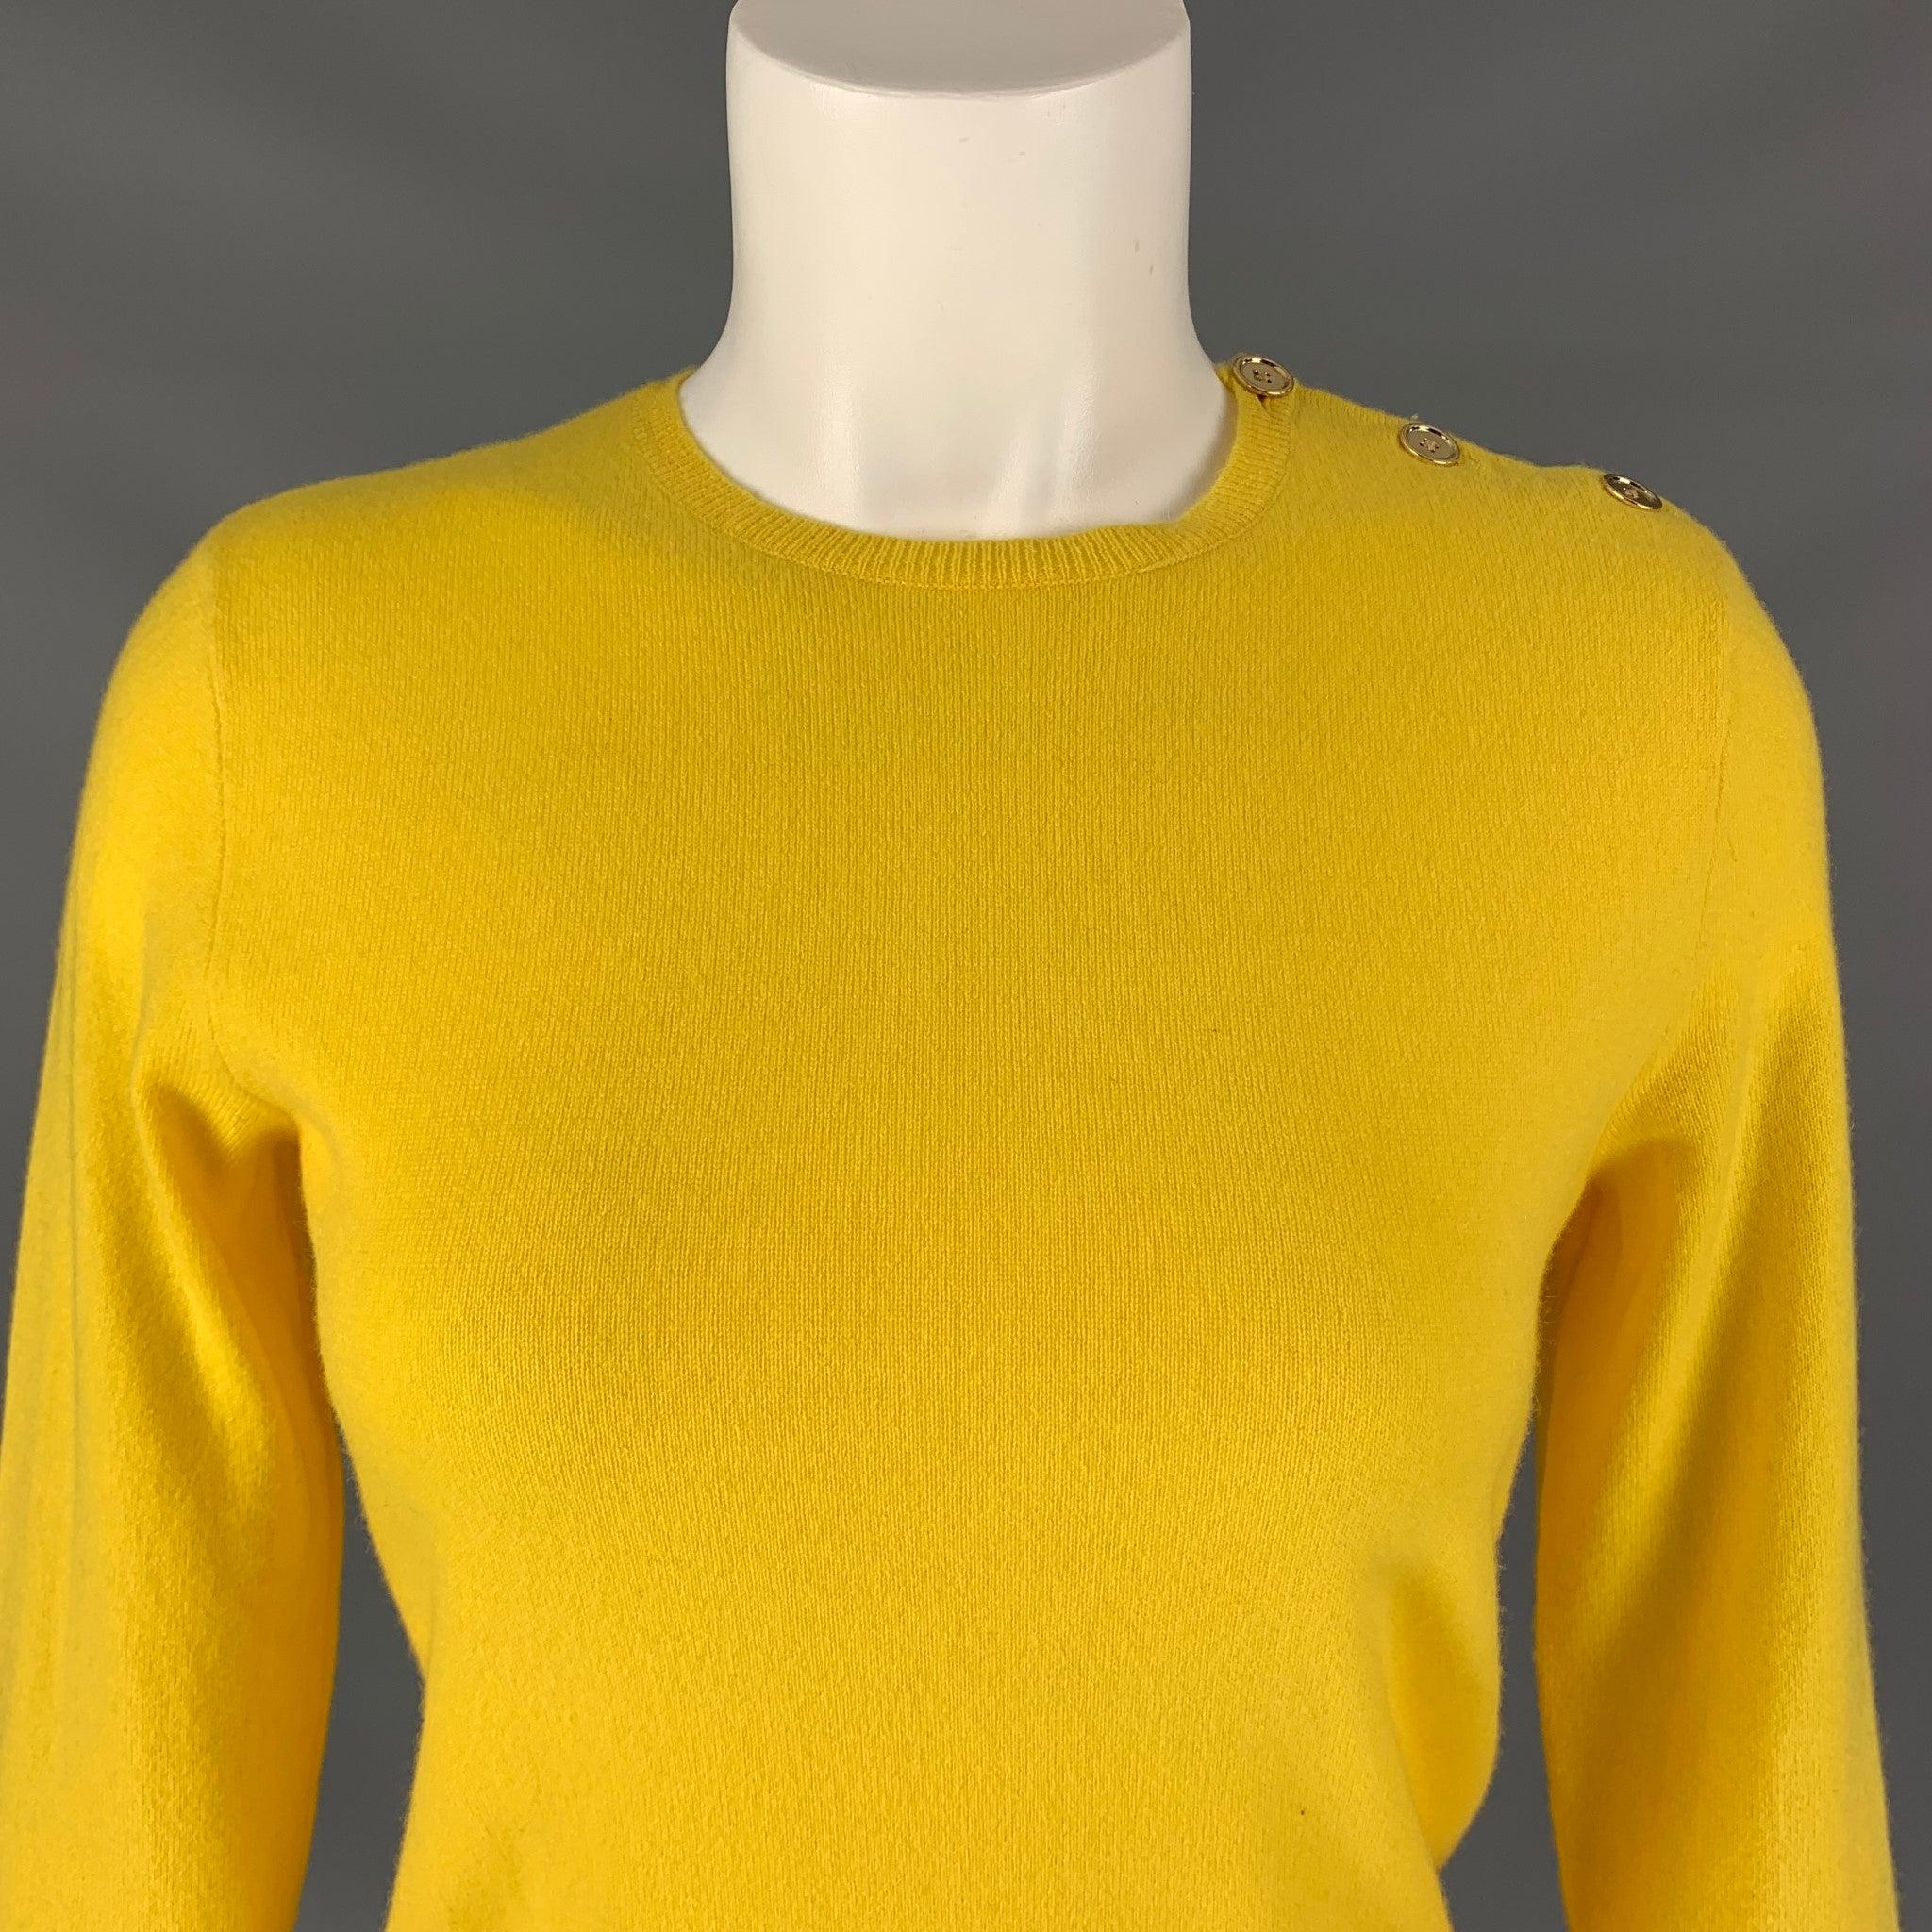 RALPH LAUREN pullover sweater comes in a yellow knitted cashmere featuring asymmetric shoulder button, a crew neckline, and long sleeves.
Excellent Pre-Owned Condition.  

Marked:   M 

Measurements: 
 
Shoulder:14 inBust: 30 inSleeve: 19